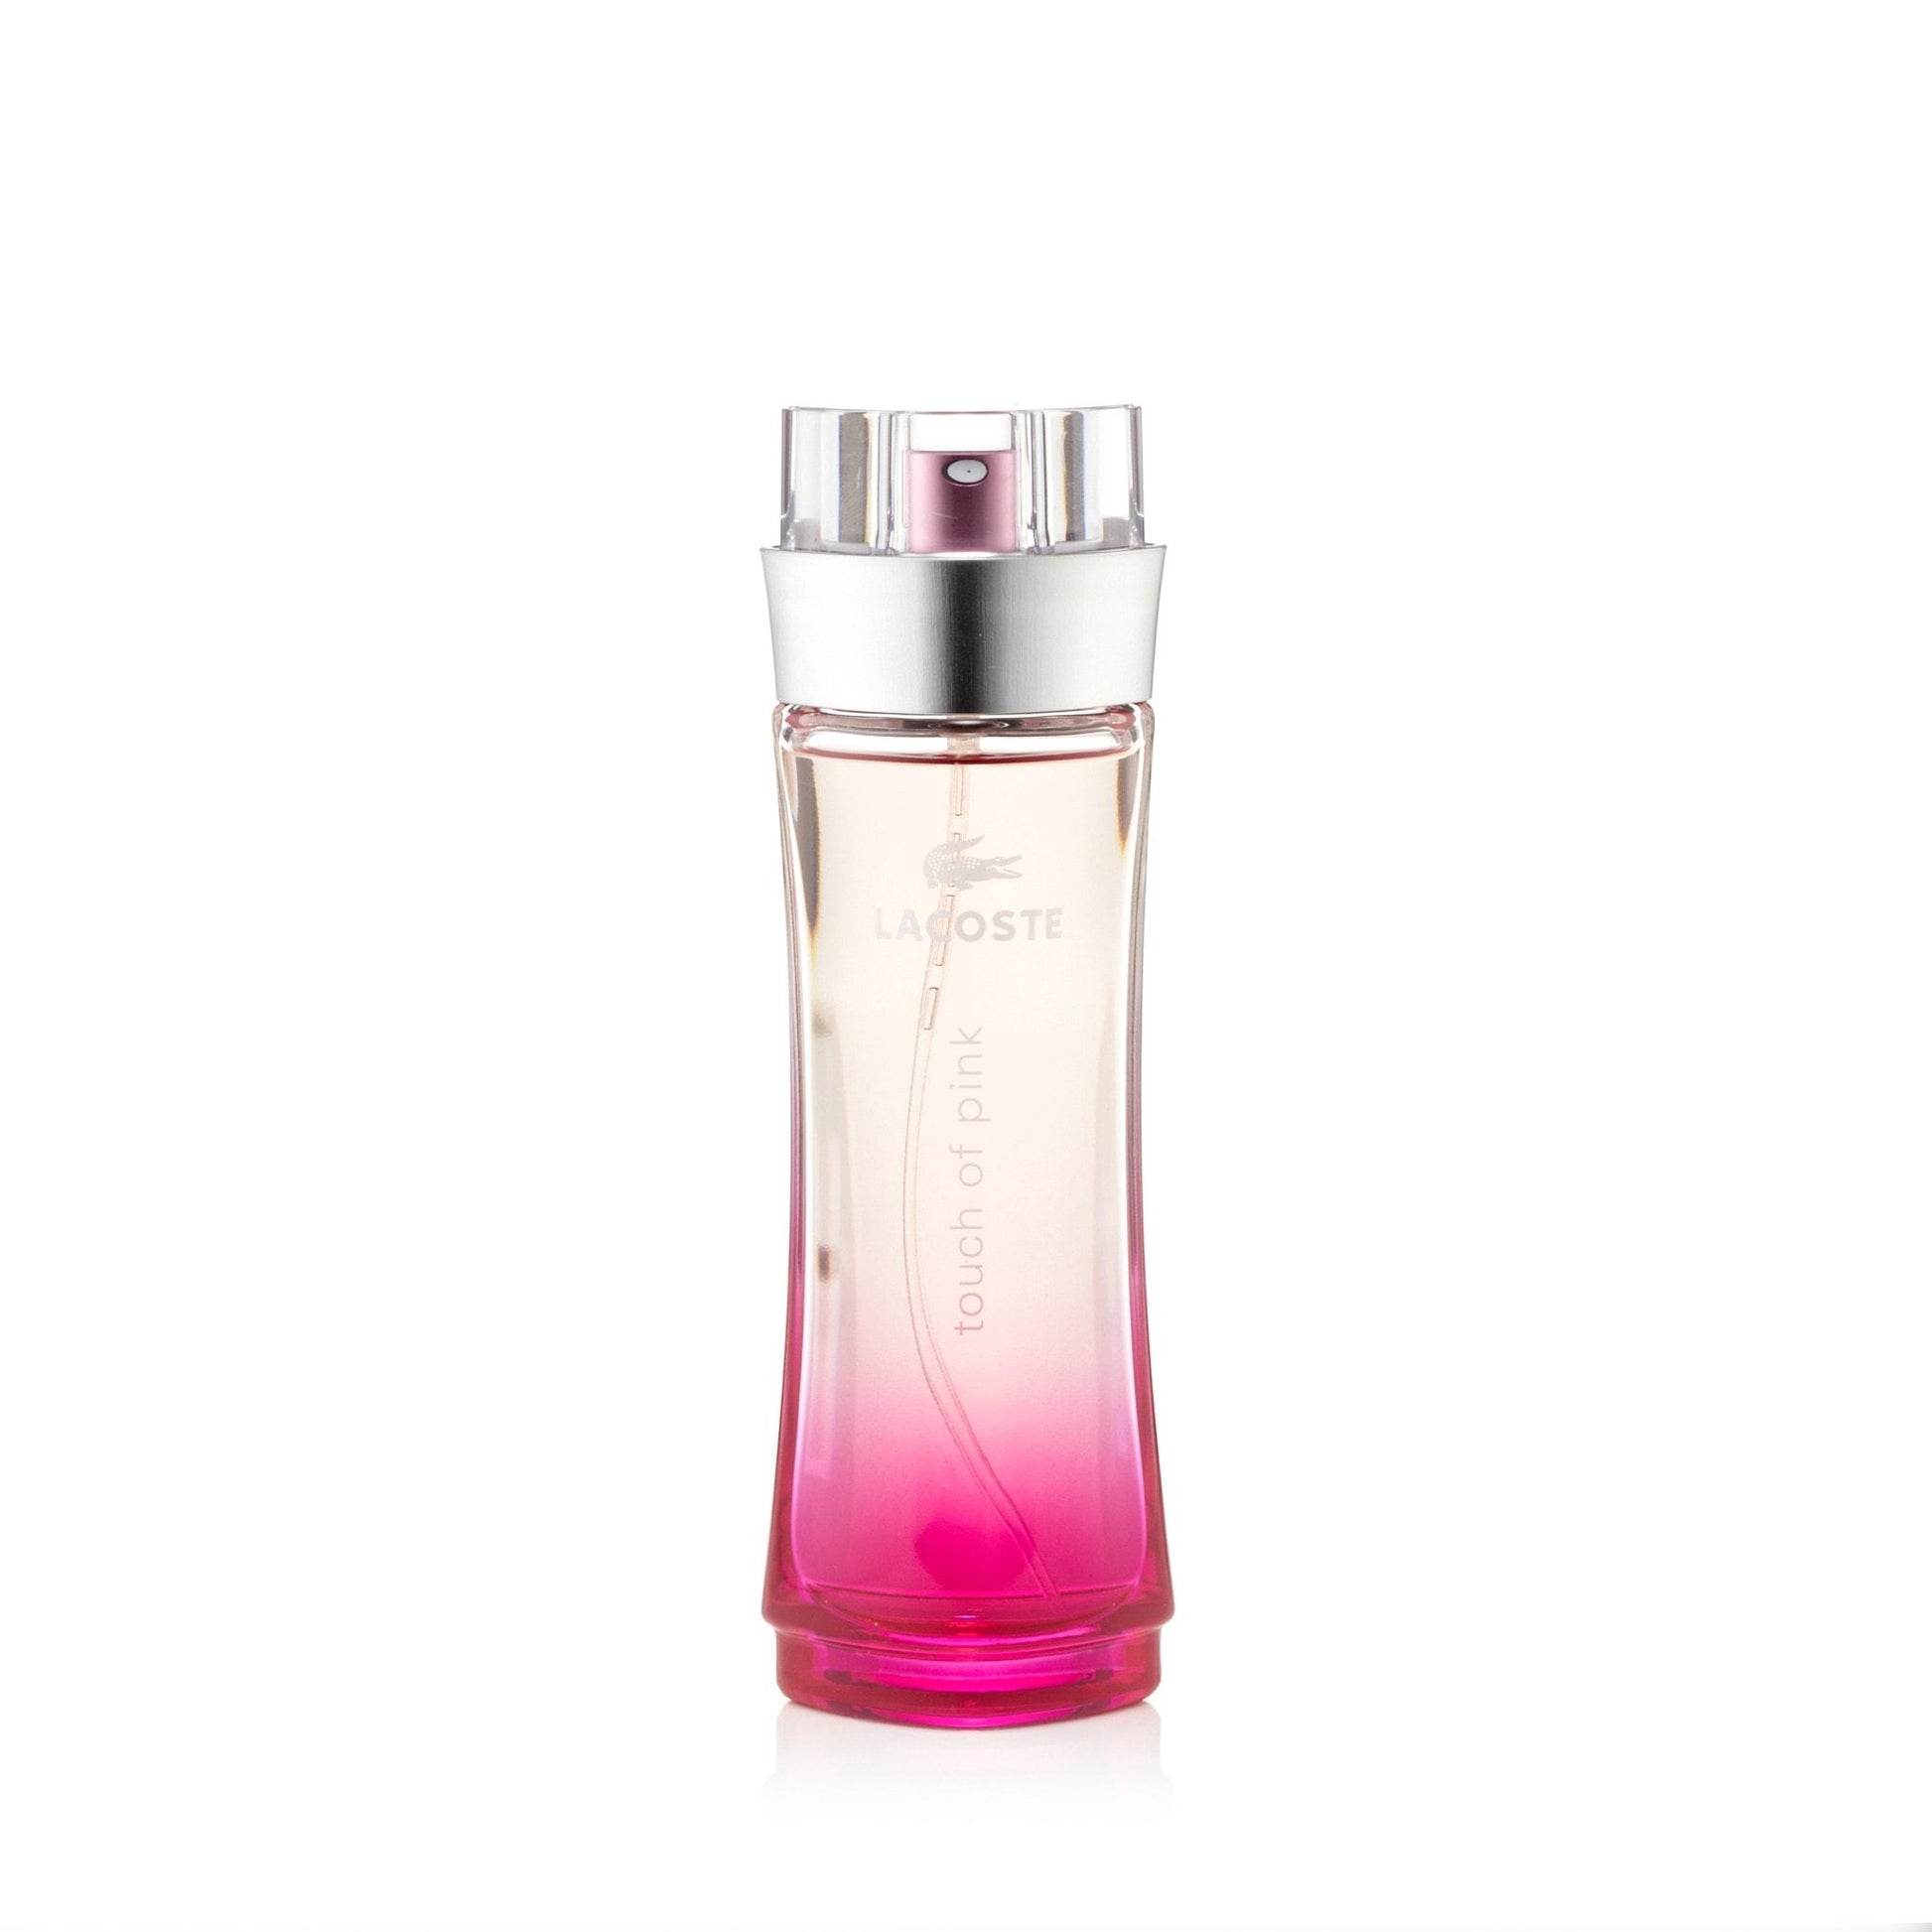 Touch of Pink Eau de Toilette Spray for Women by Lacoste, Product image 2